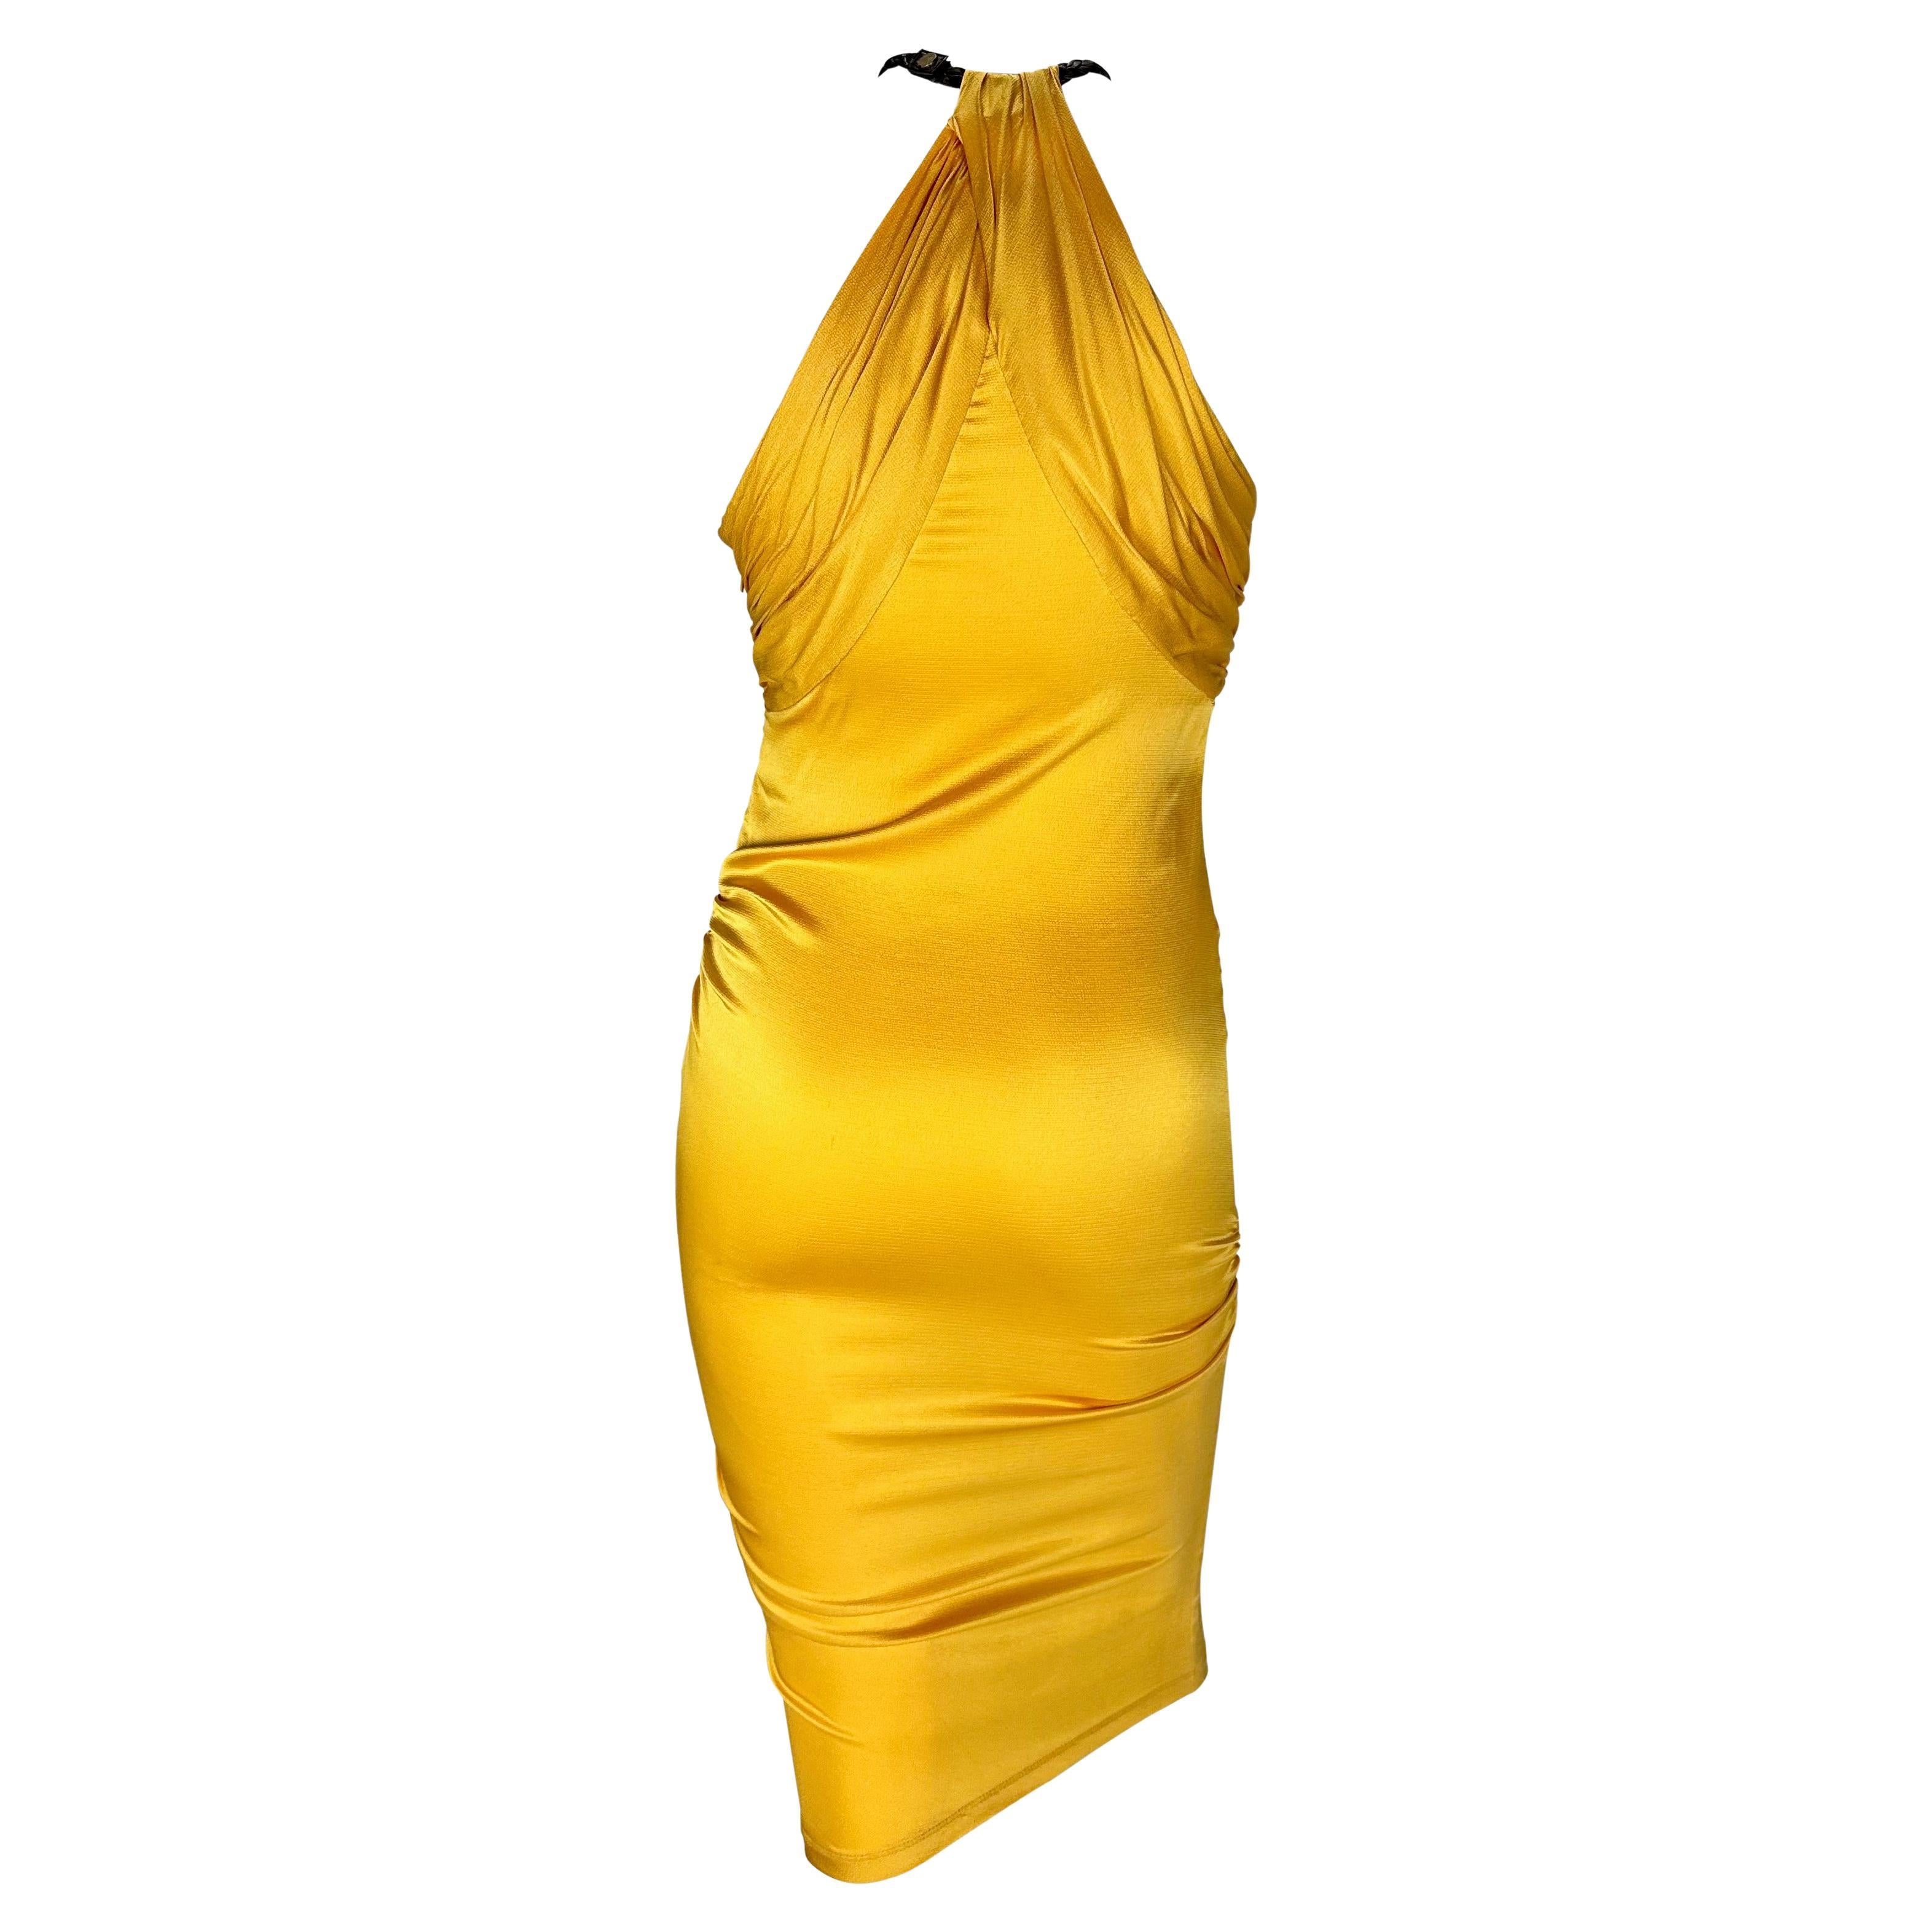 Women's S/S 2005 Gucci Beyoncé Marigold Yellow Ruched Satin Braided Leather Halter Dress For Sale